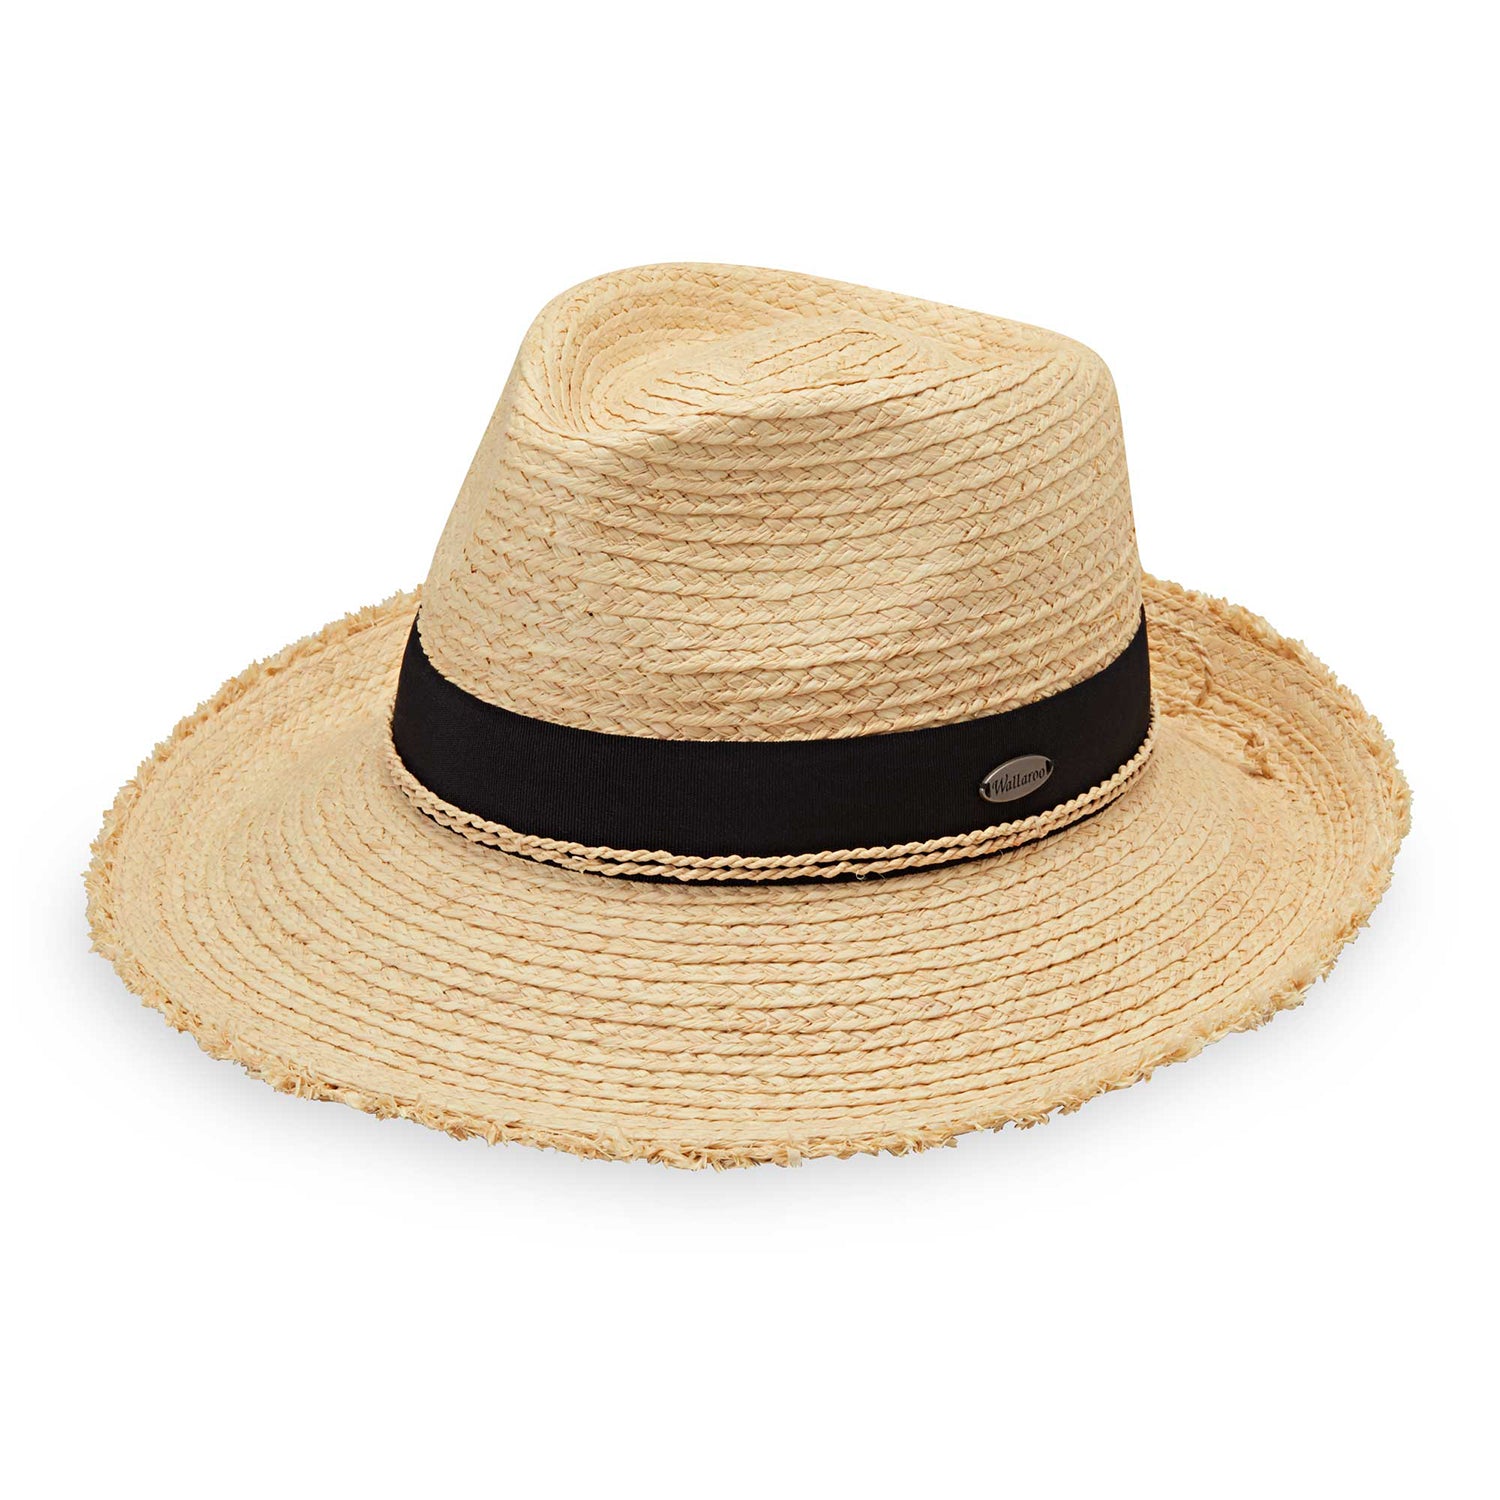 Featuring Paloma straw sun beach hat by Wallaroo, featuring a UPF 50+ rating and  frayed brim